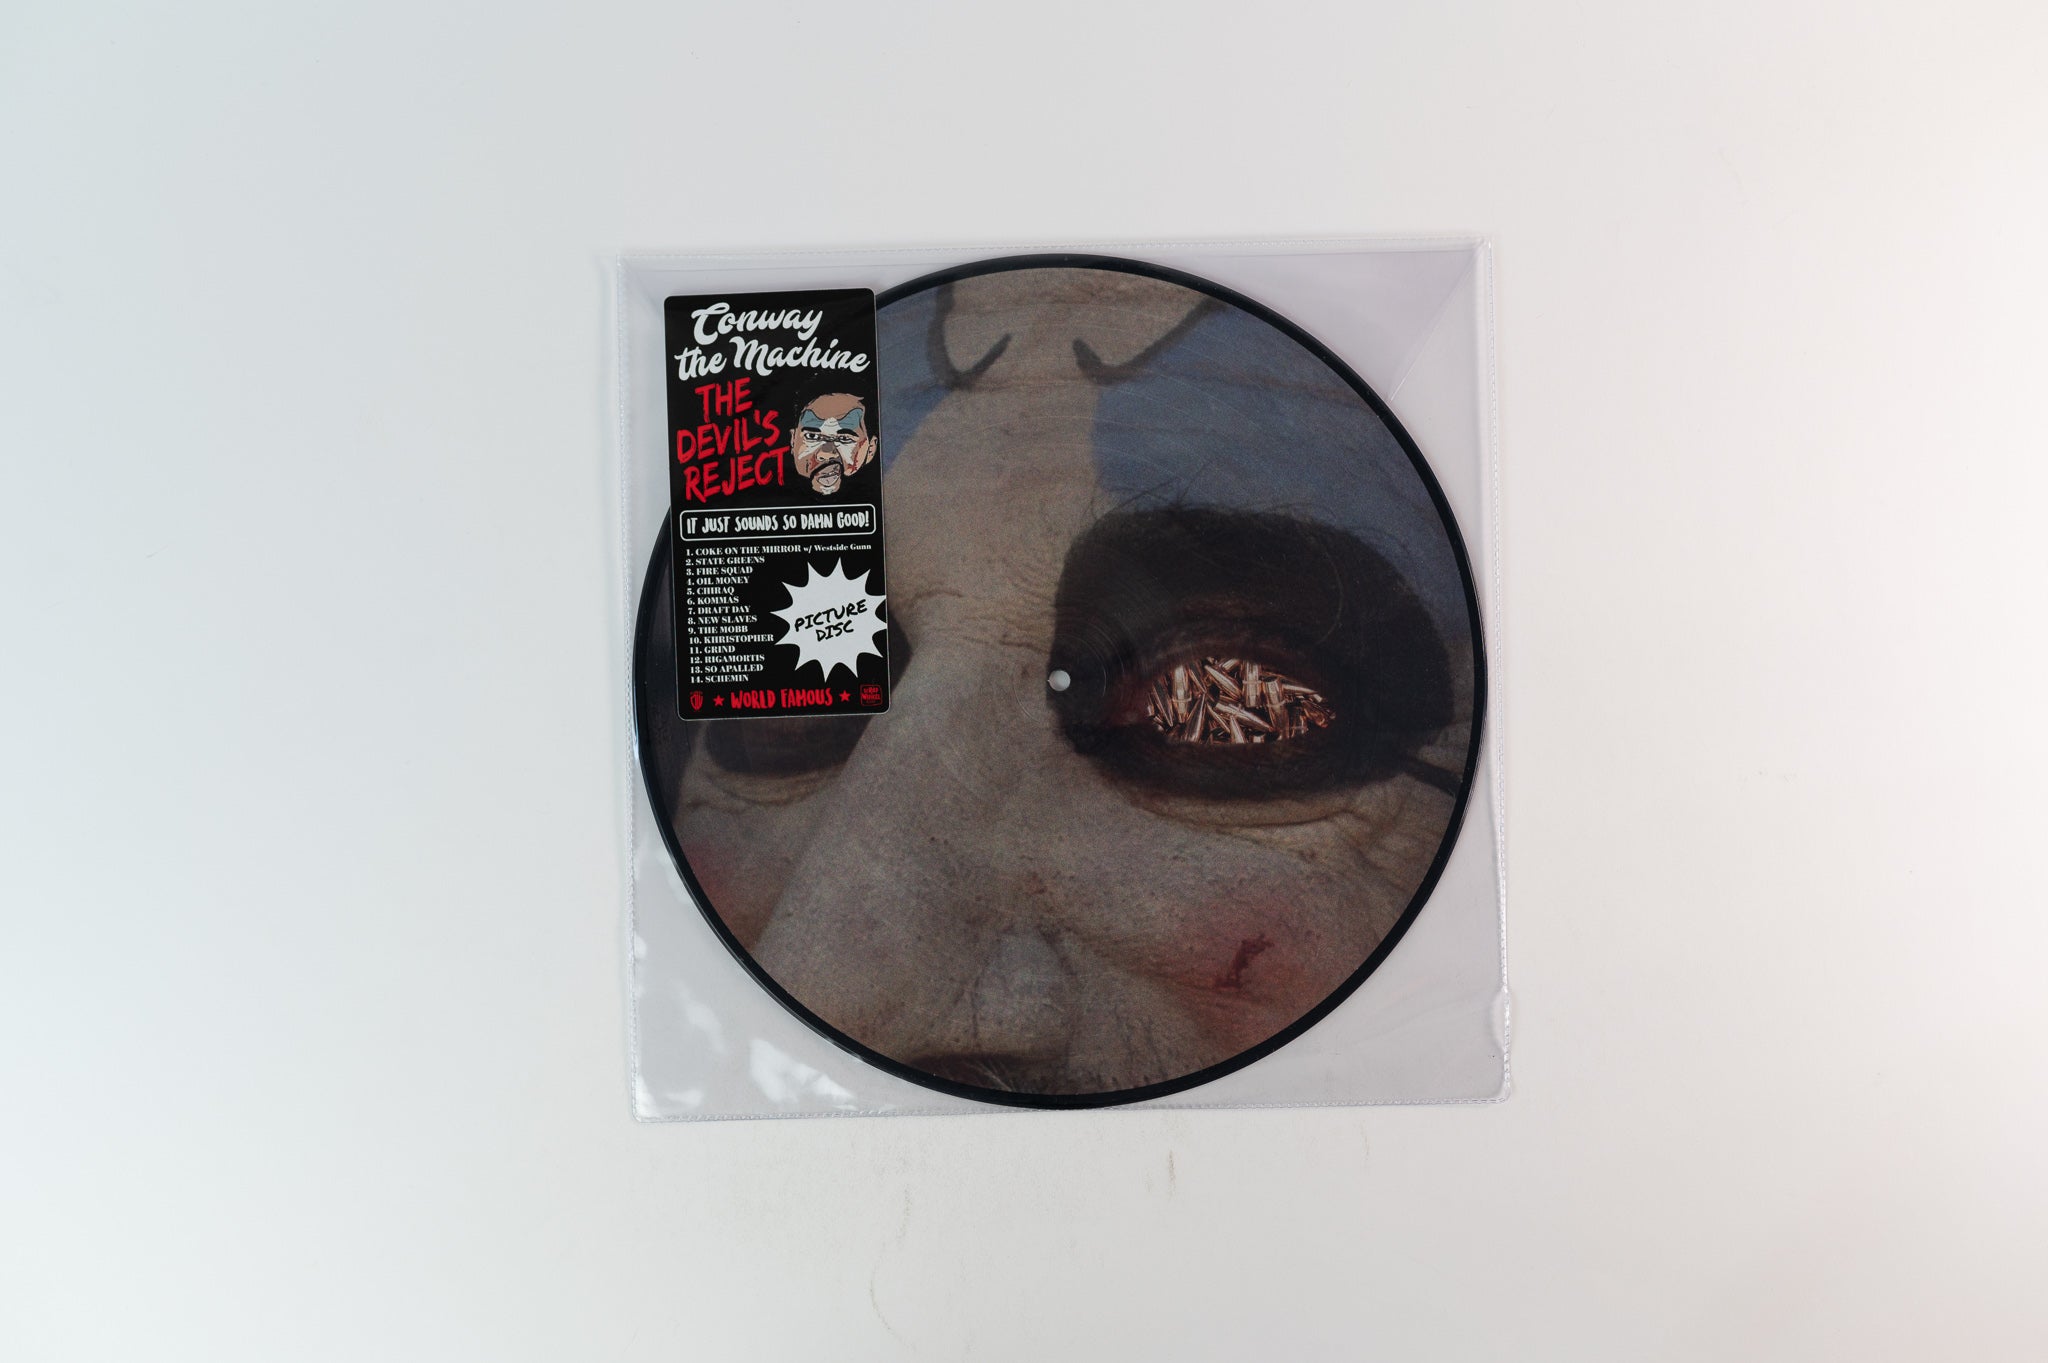 Conway - The Devil's Reject on de Rap Winkel Records Dutch Limited Numbered Picture Disc